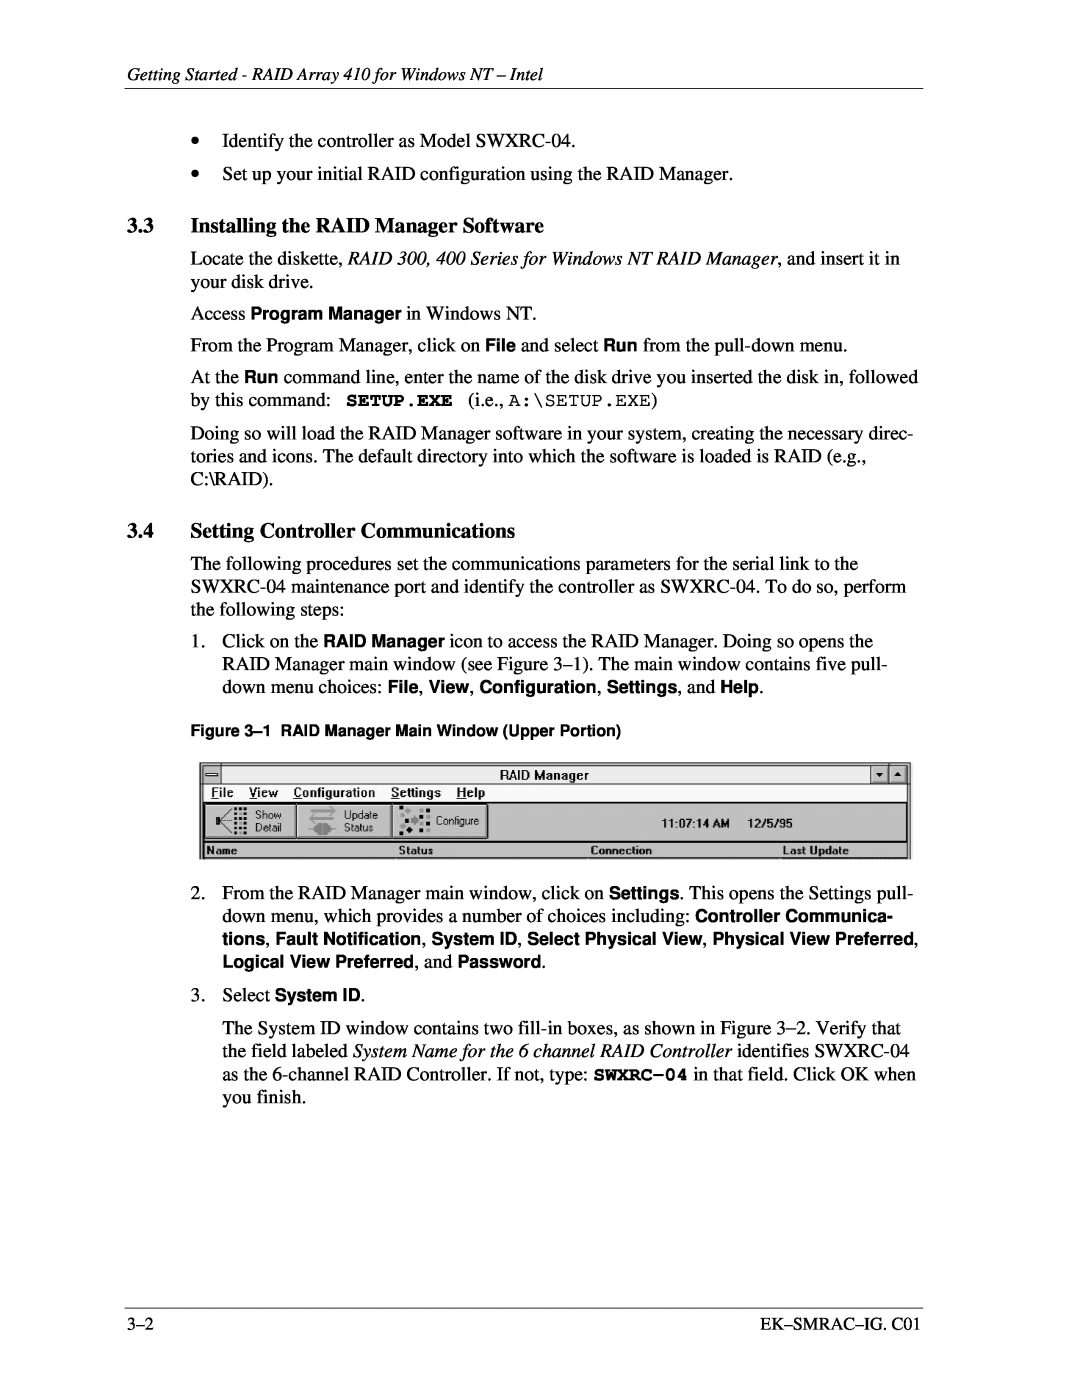 Intel 410 manual 3.3Installing the RAID Manager Software, 3.4Setting Controller Communications 